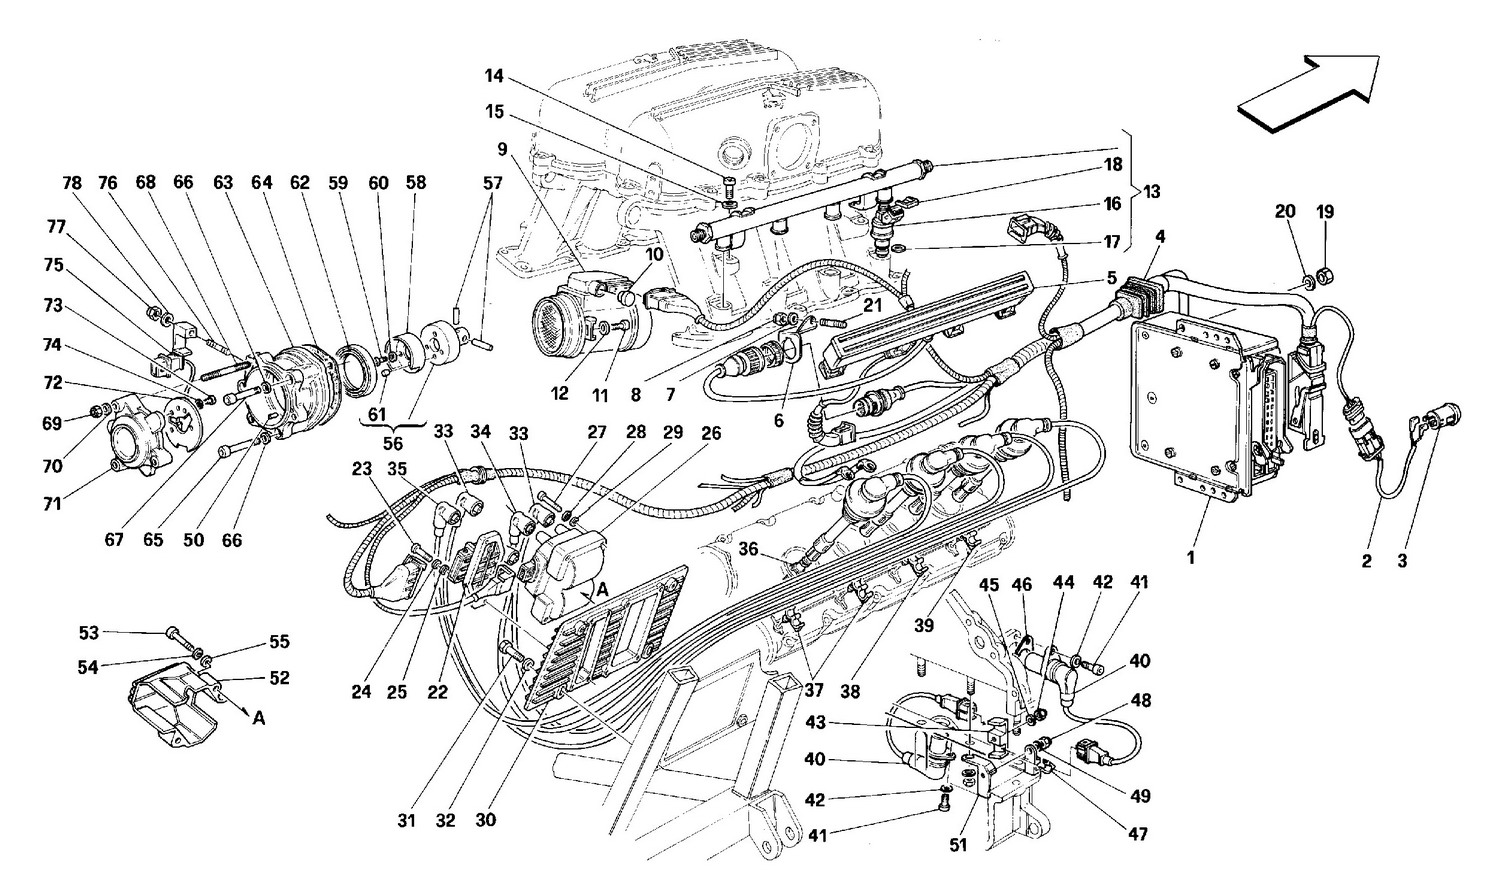 Schematic: Air Injection - Ignition